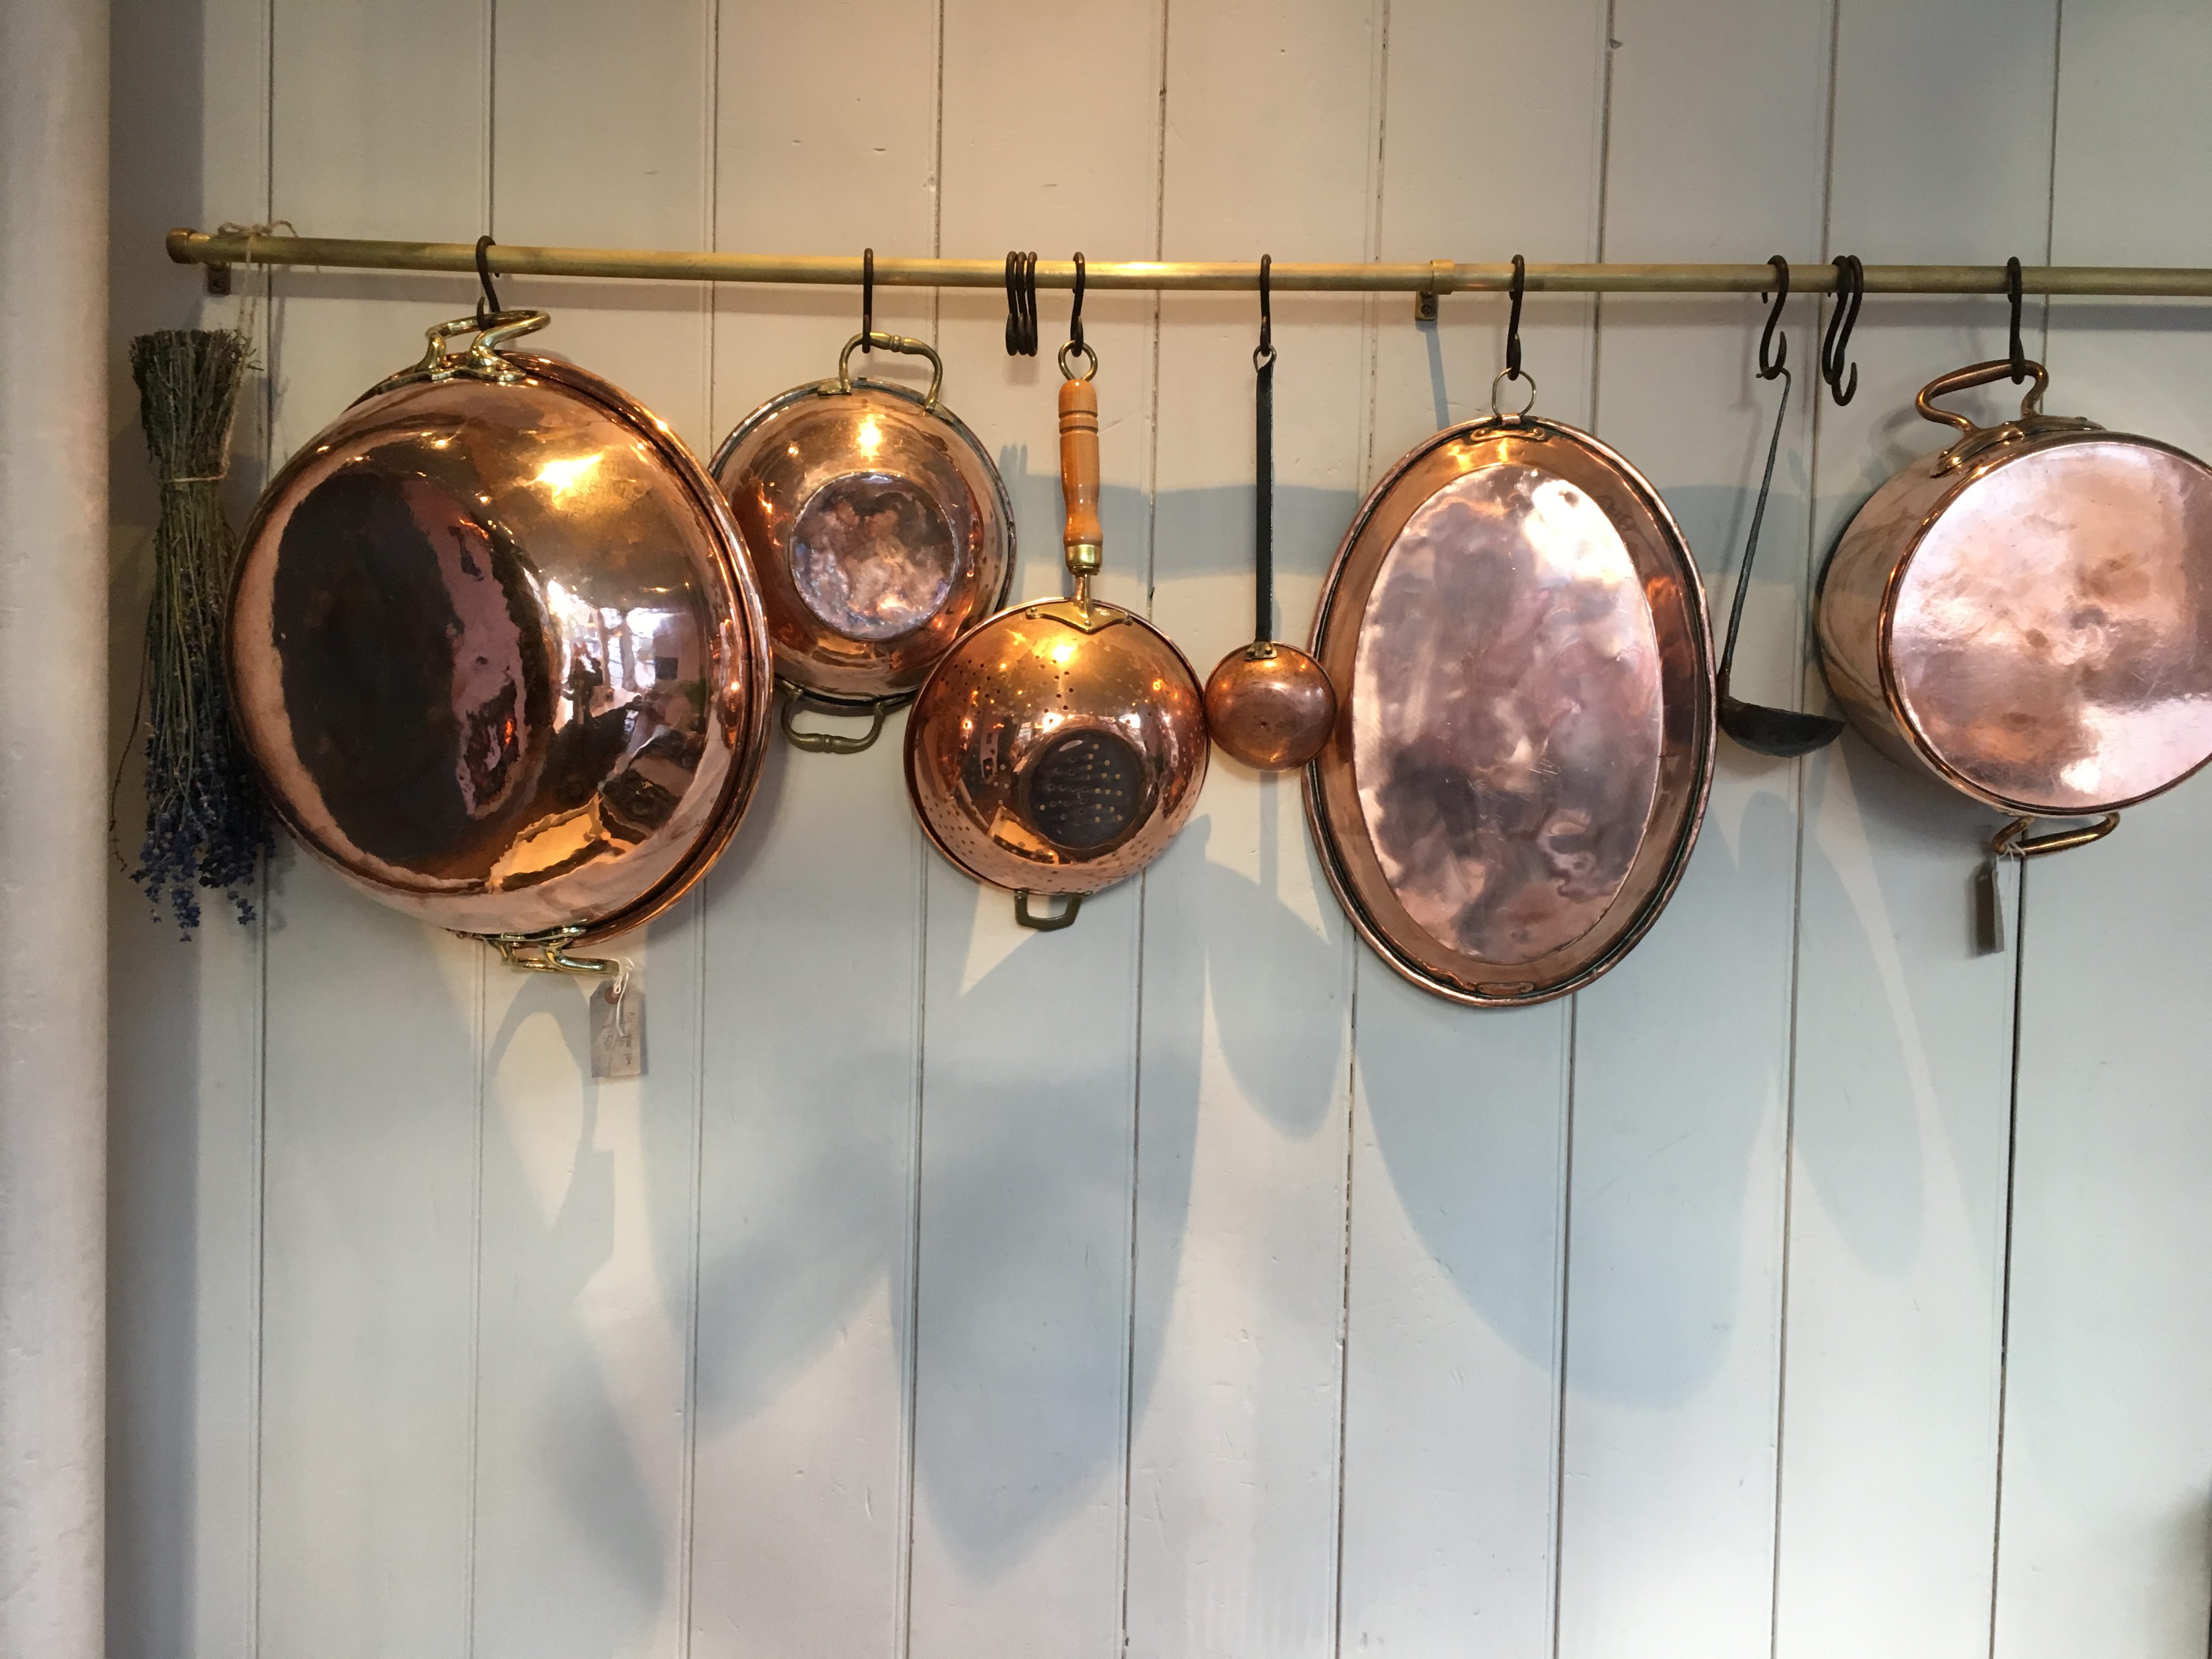 A cooks Kitchen full of copper pans and utensils